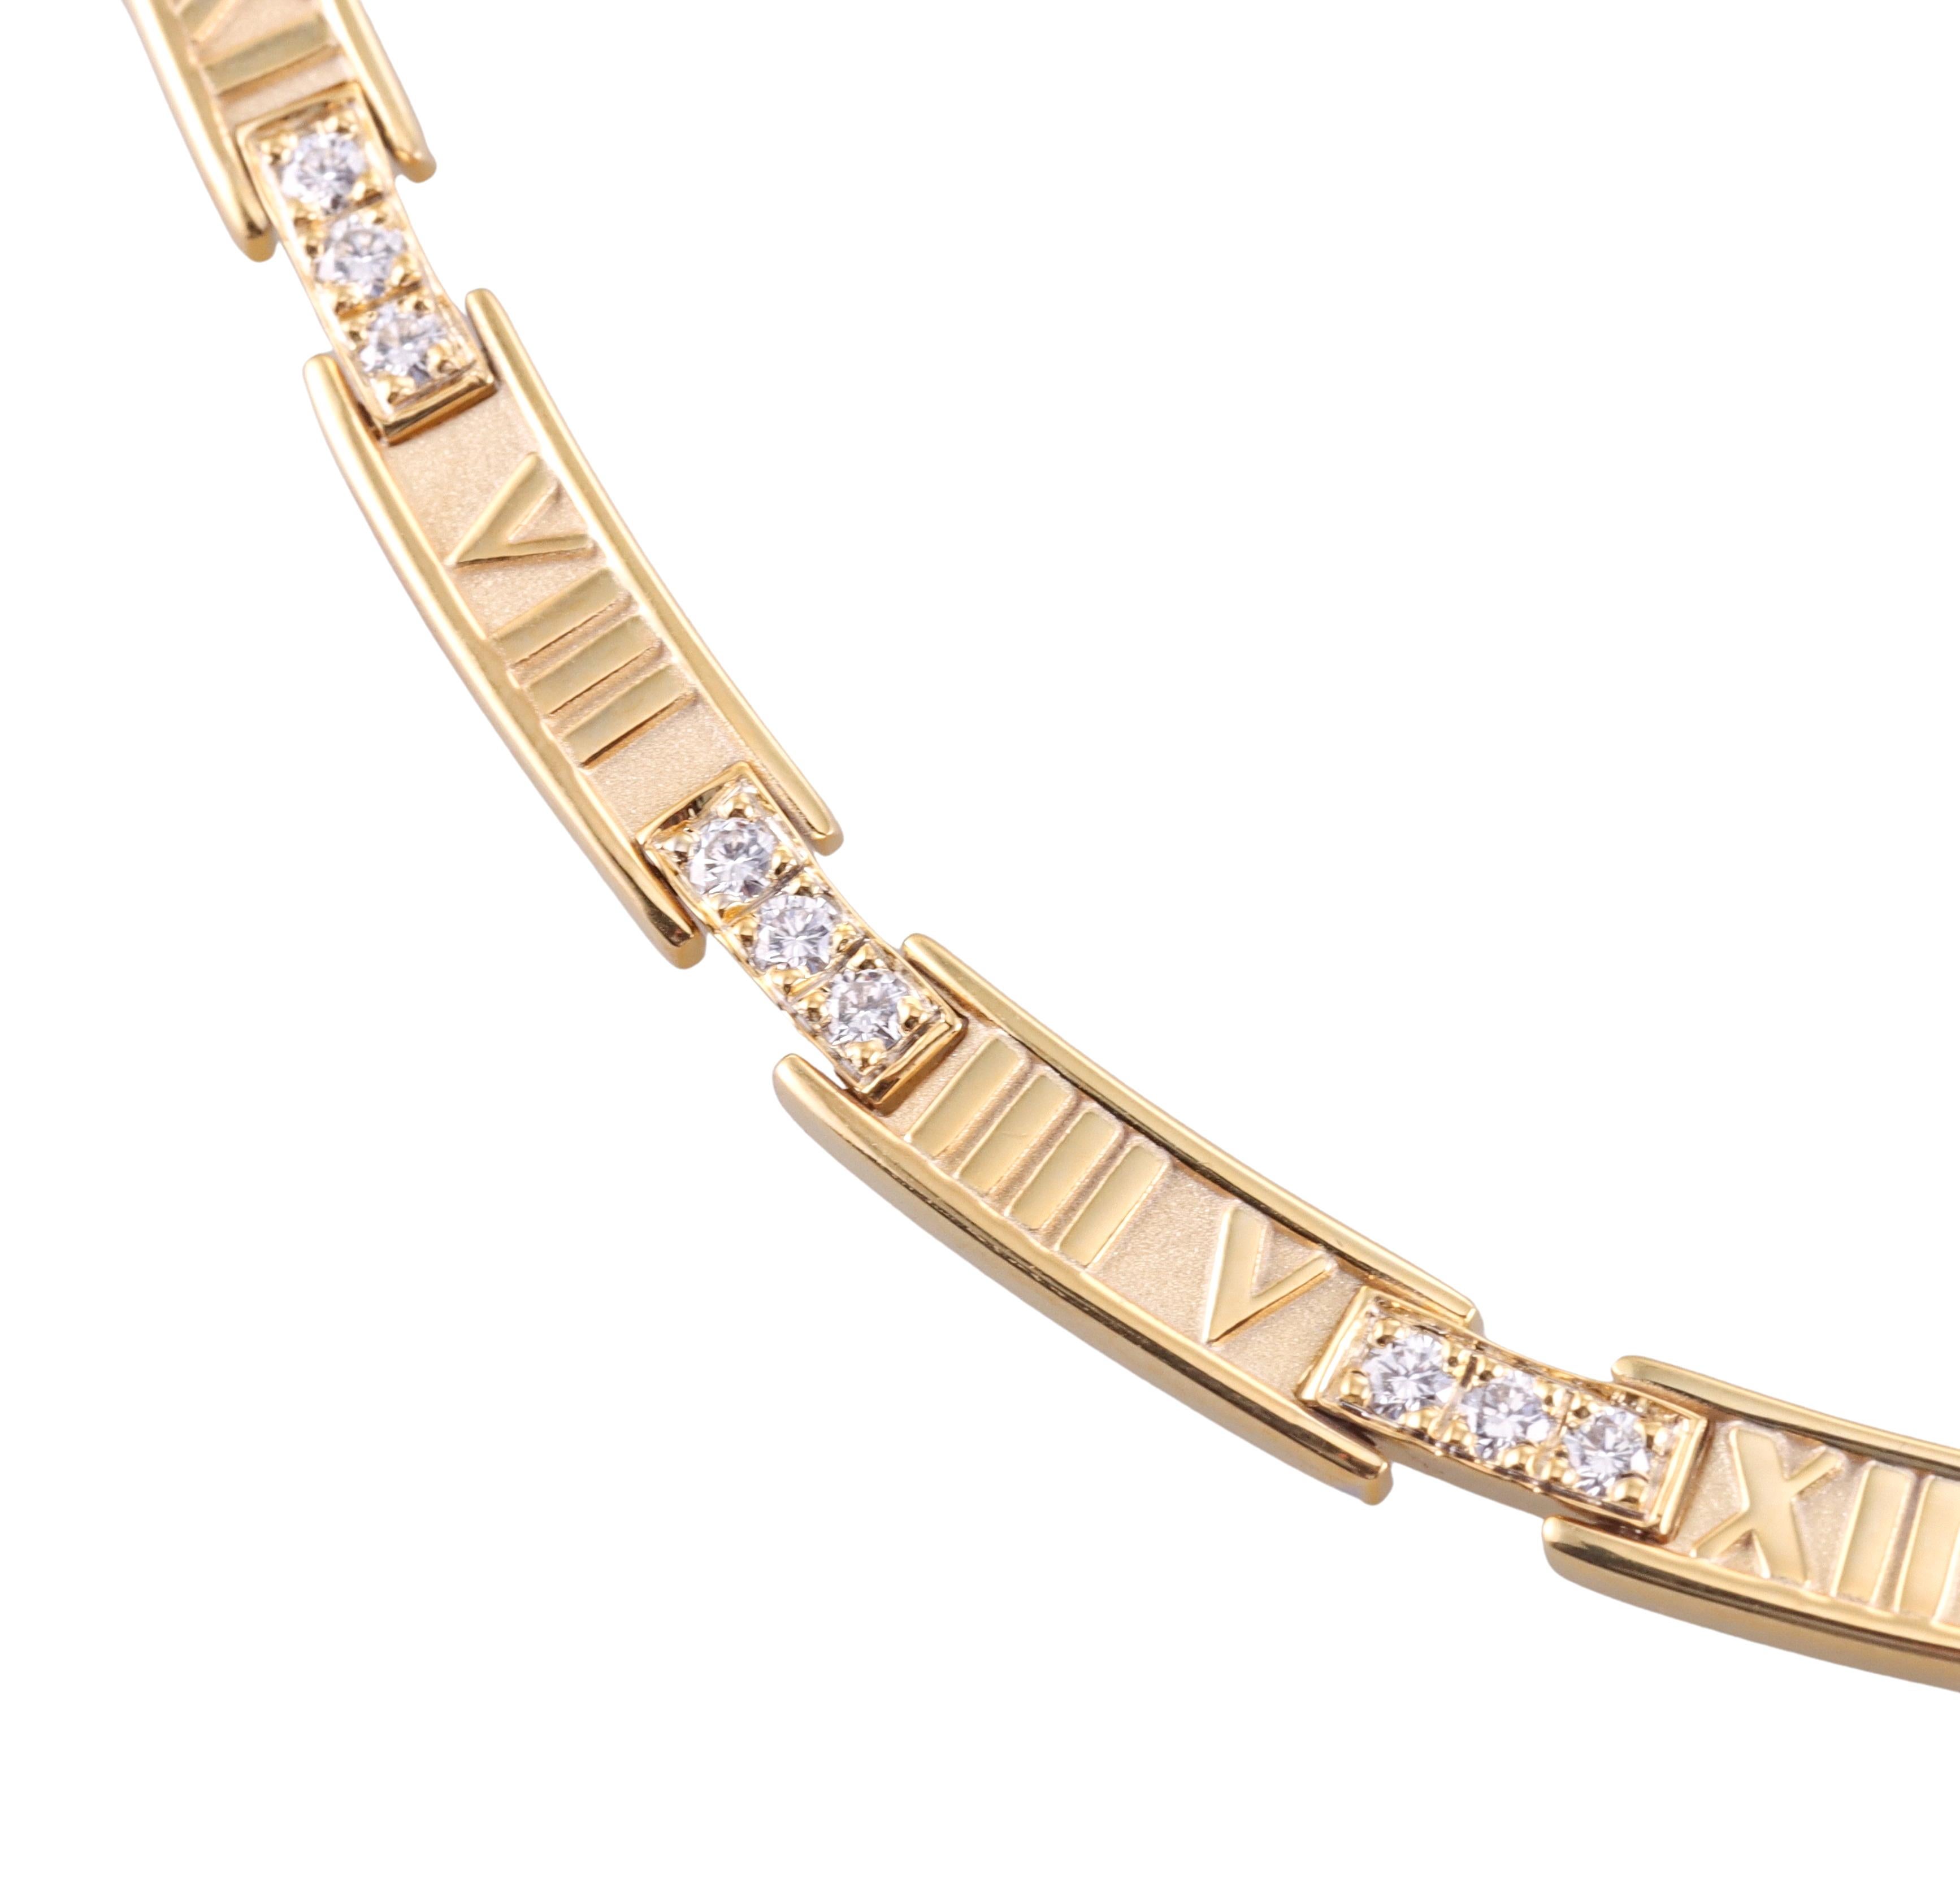 Tiffany & Co 18k yellow gold Atlas necklace, featuring ten diamond links - approximately 1.00ctw G/VS. Necklace is 16.5